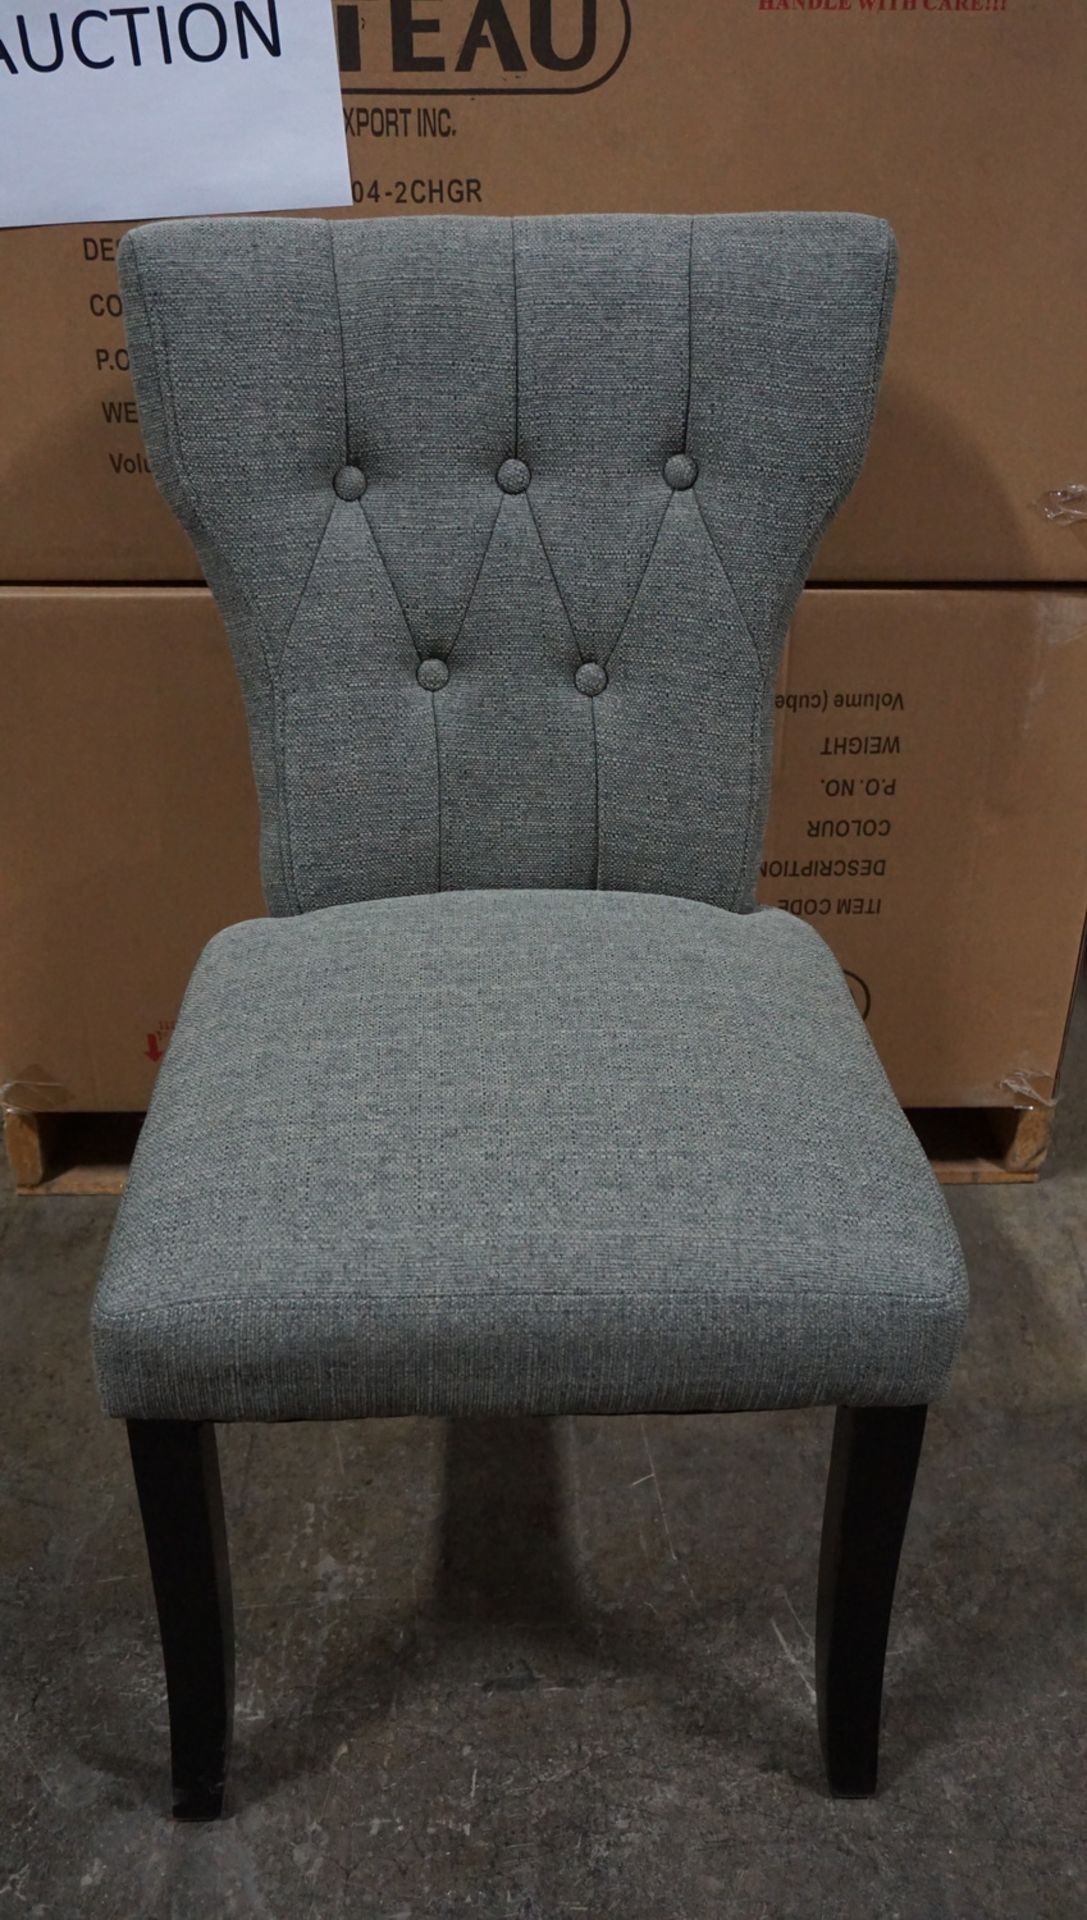 UNITS - GREY FABRIC UPHOLSTERED WING BACK DINING CHAIRS W/ FINISHED LEGS (1504-2CHGR) (IN BOX)